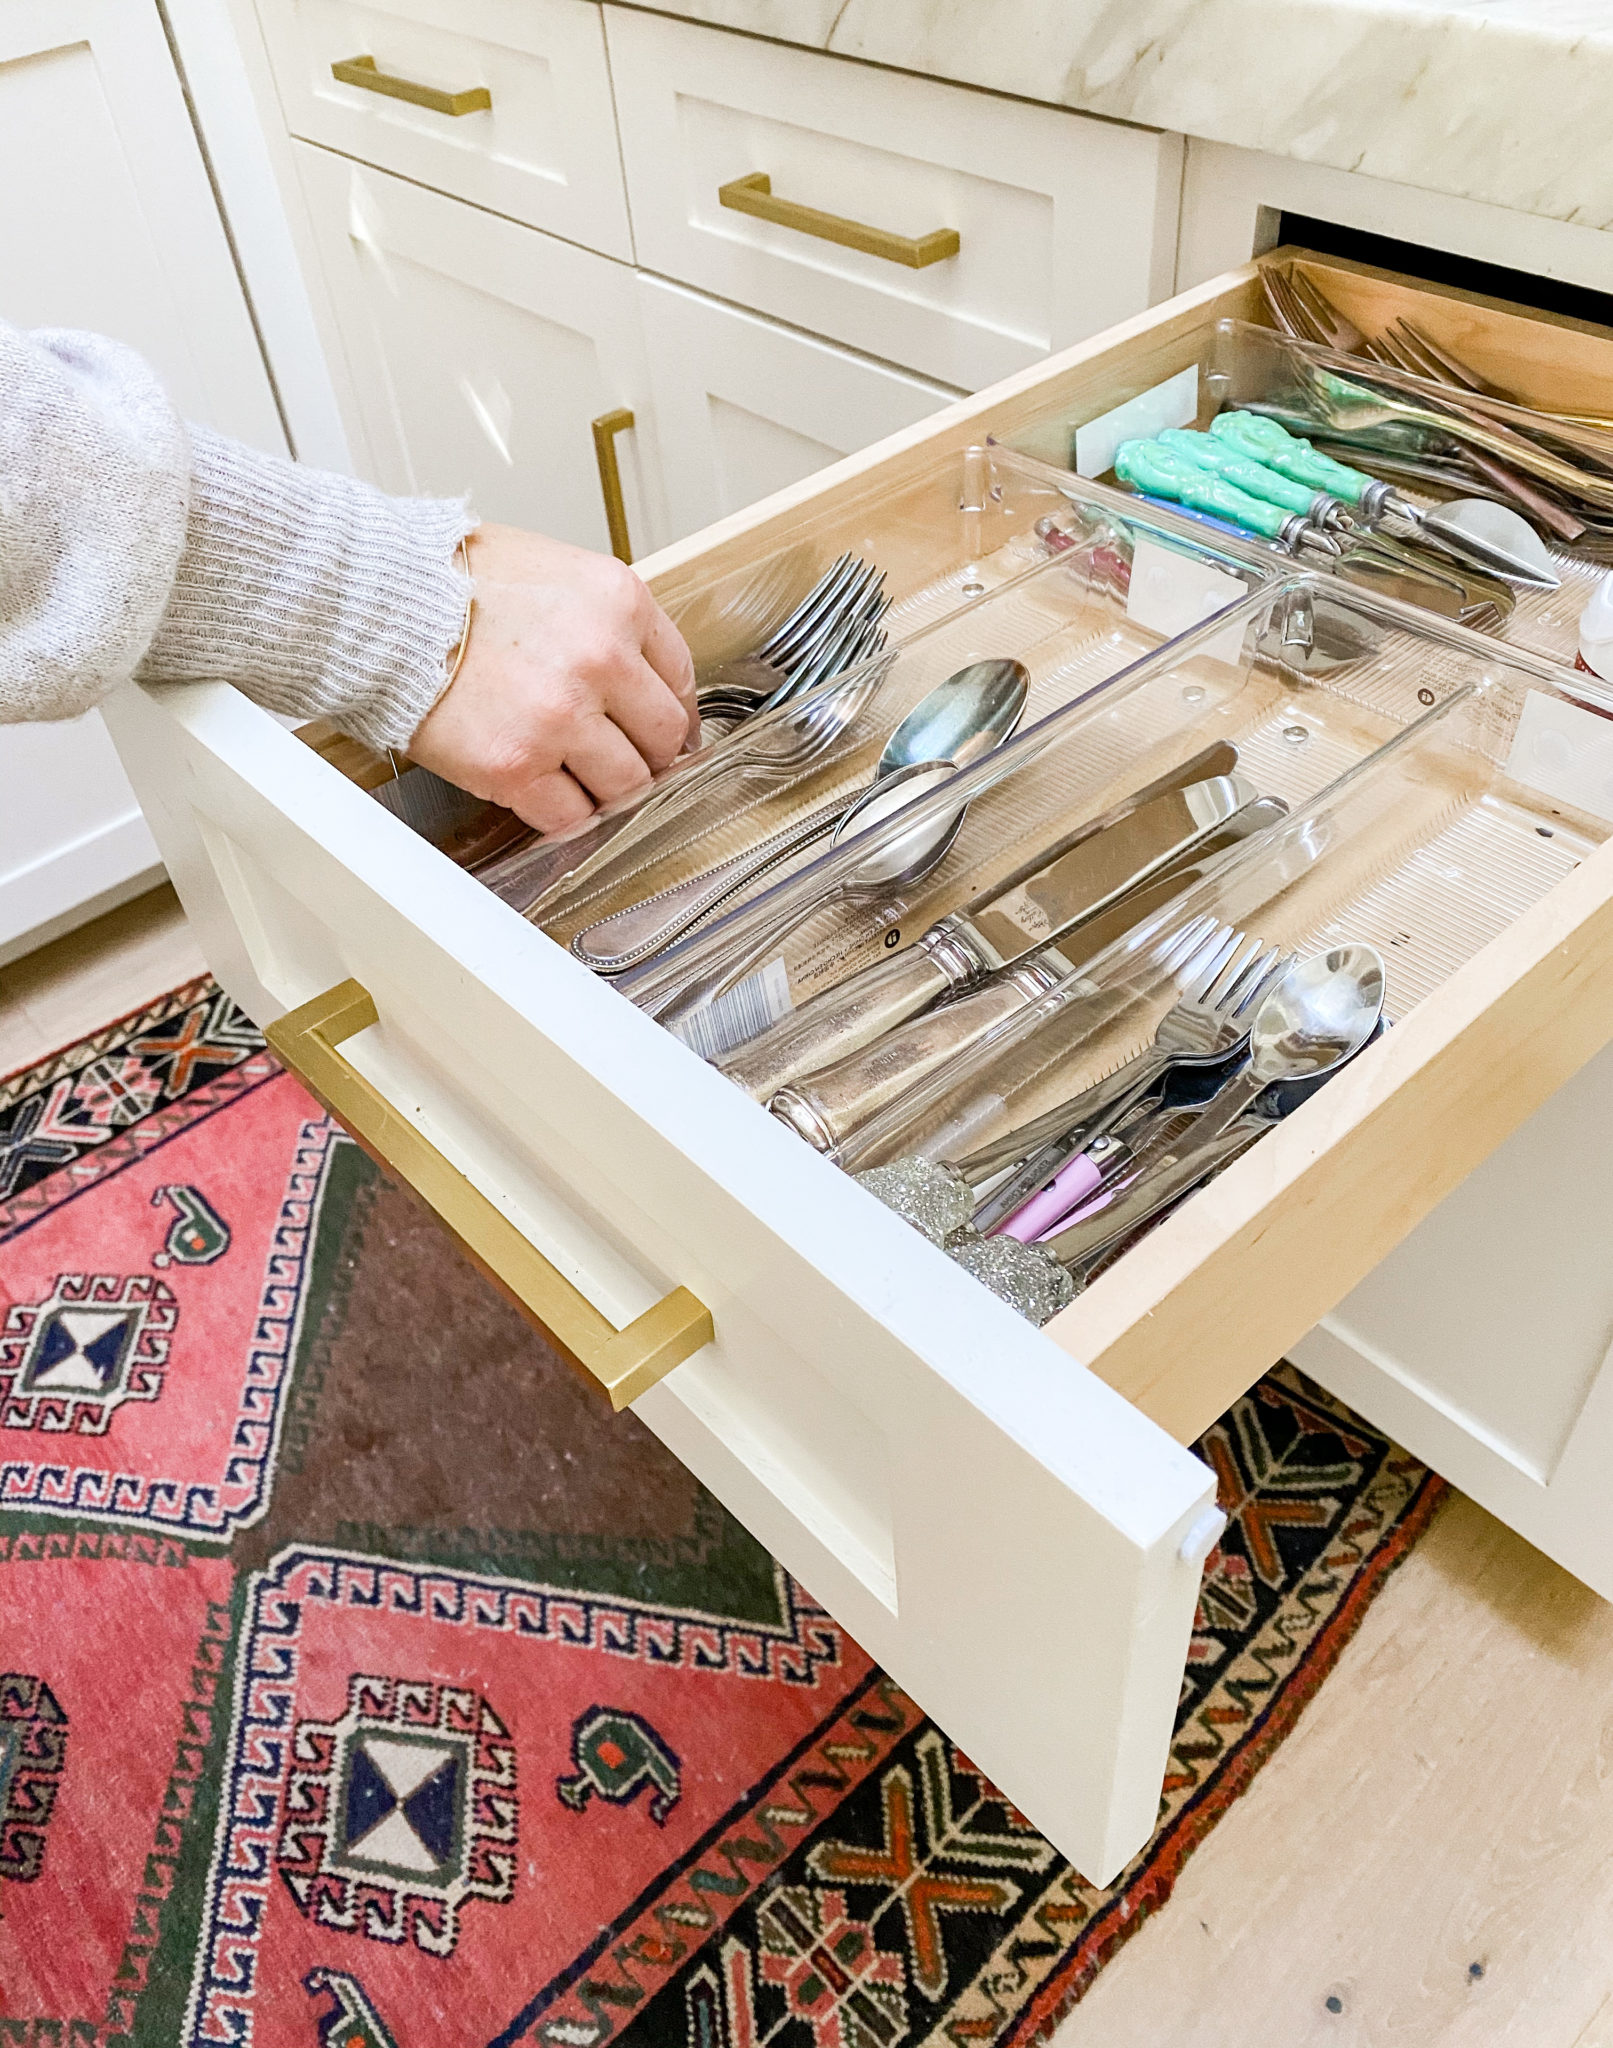 How To Organize Kitchen Drawers - Small Stuff Counts